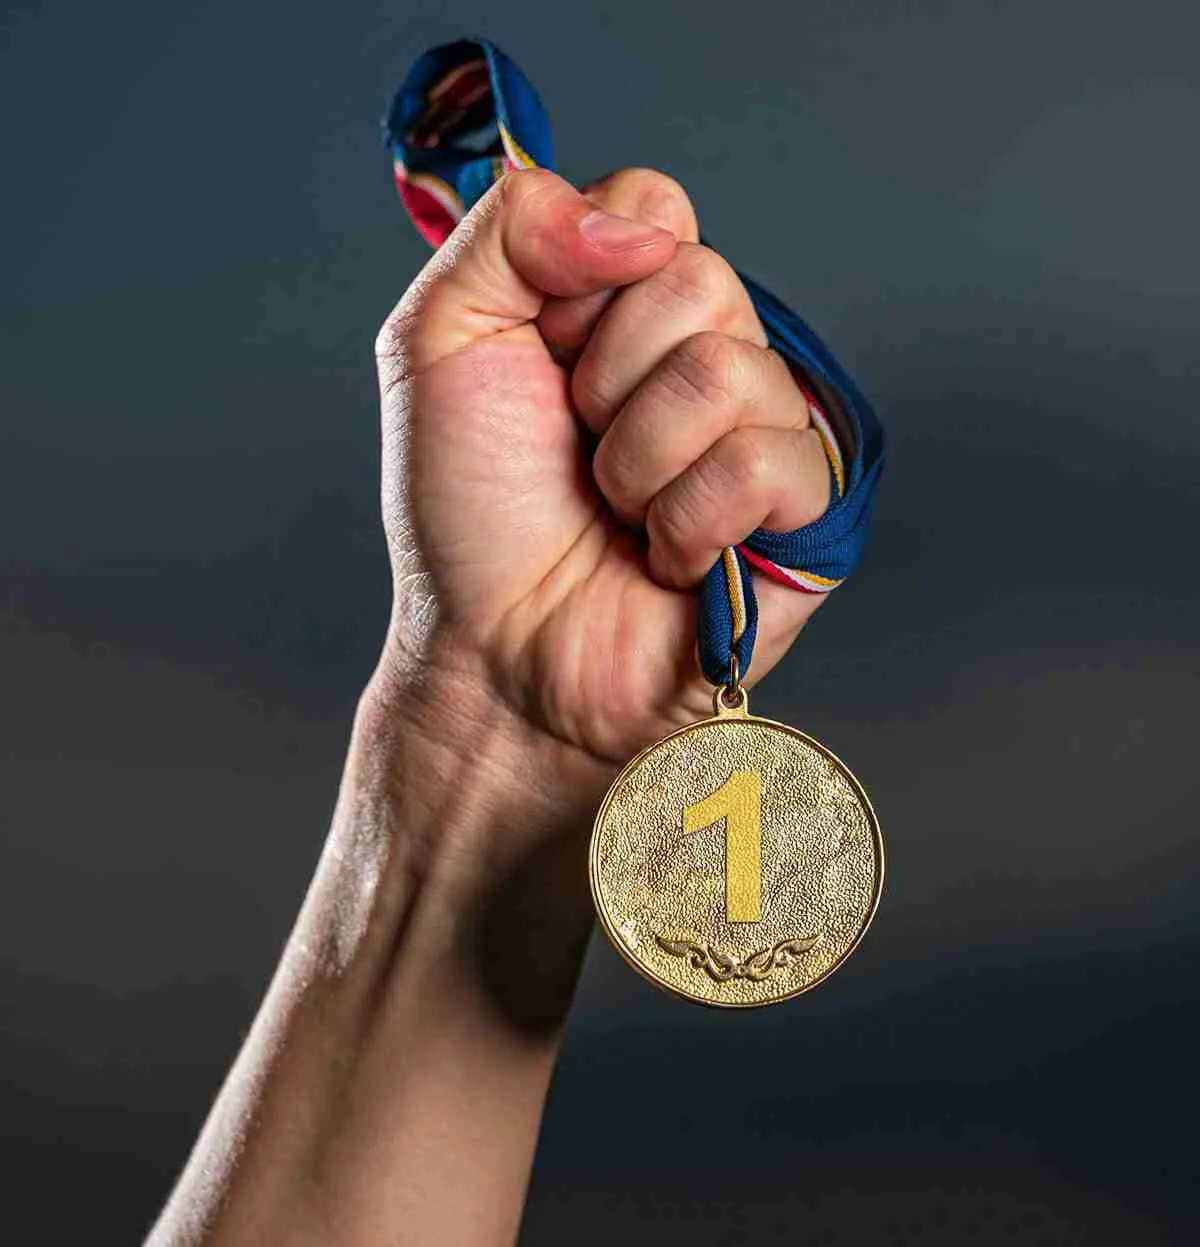 Hand holding a medal for 1st place.